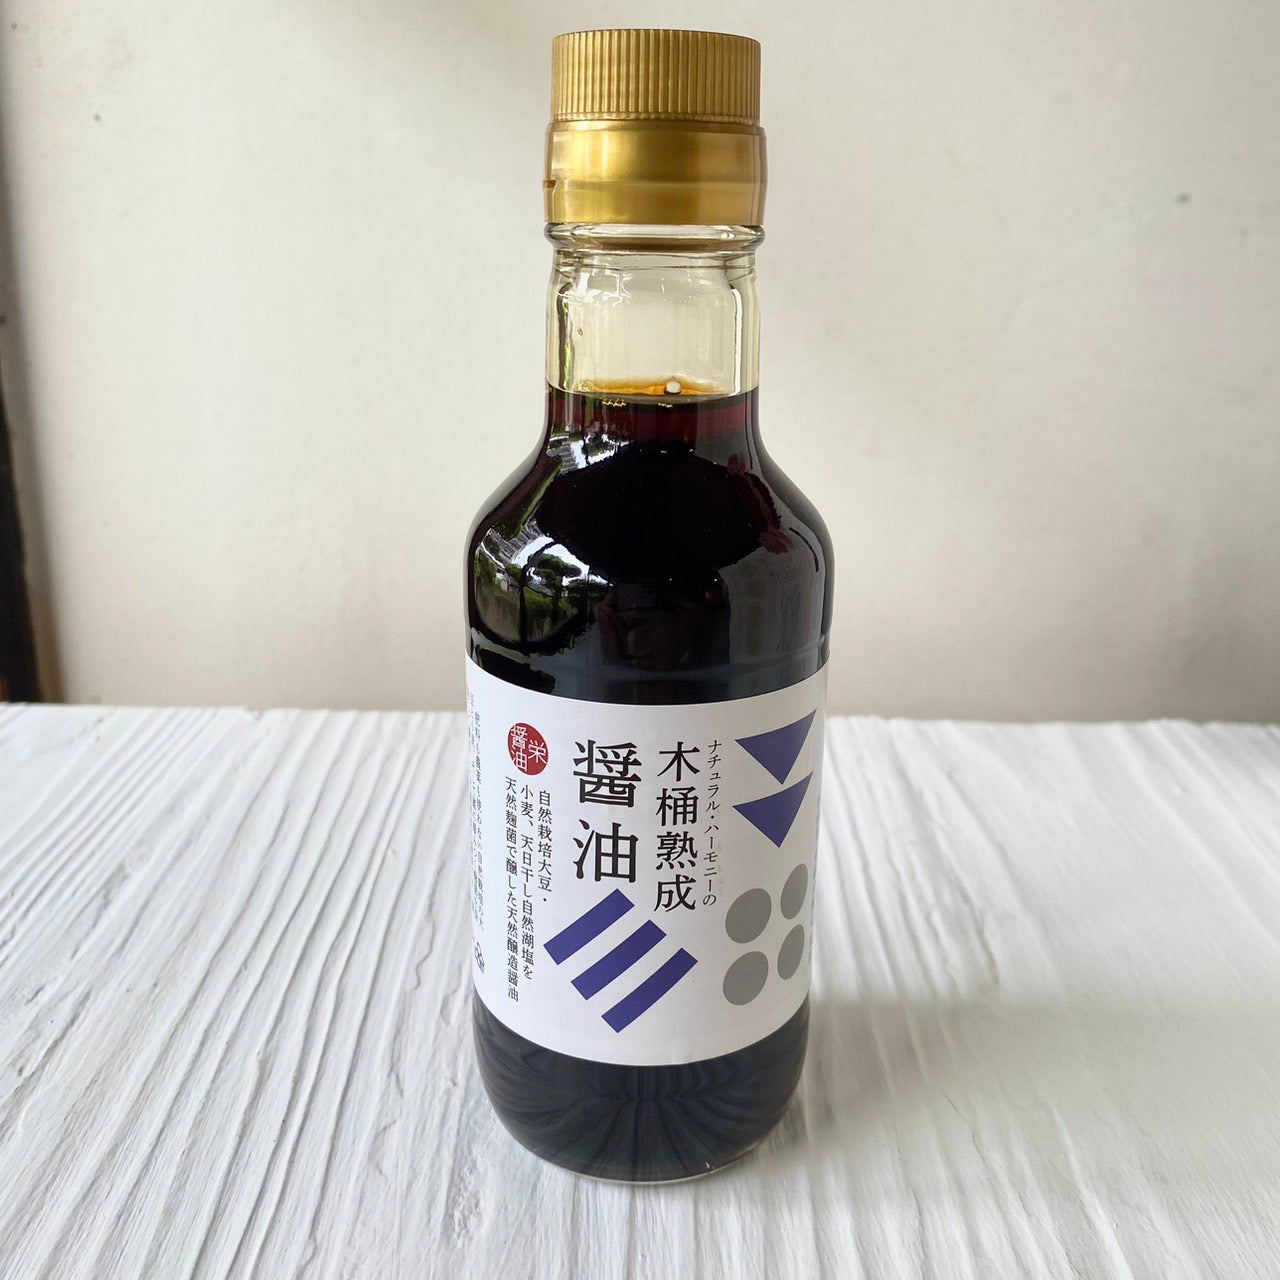 [Natural fermented food] Wooden barrel aged soy sauce